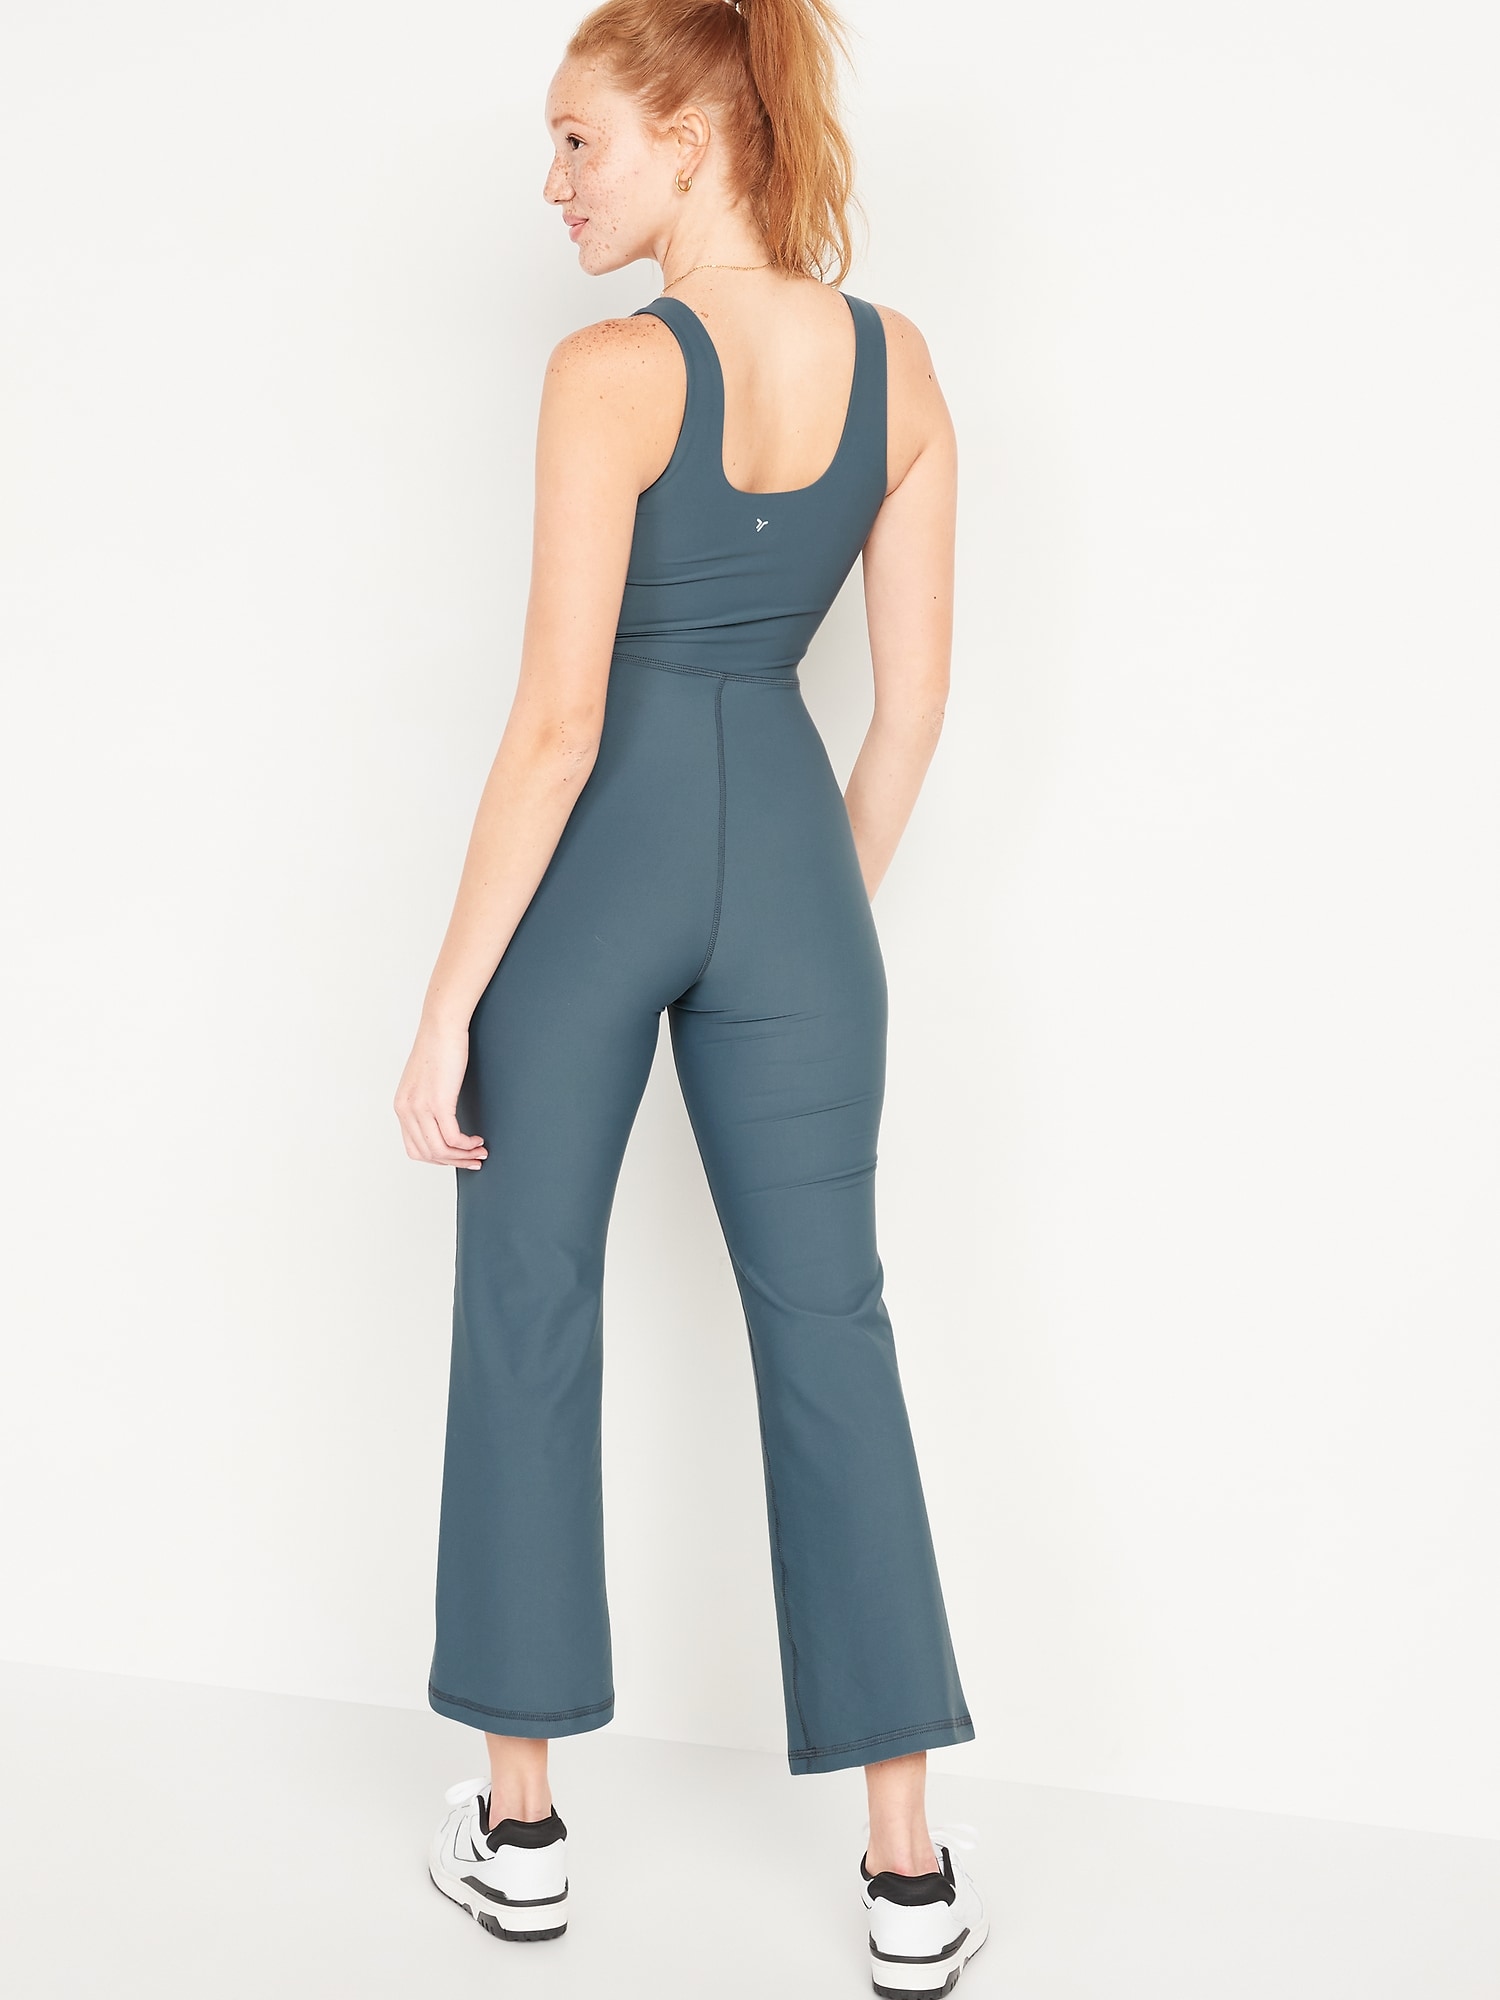 Women's Seamless Flared Jumpsuit with Built-in Bra – Sunzel